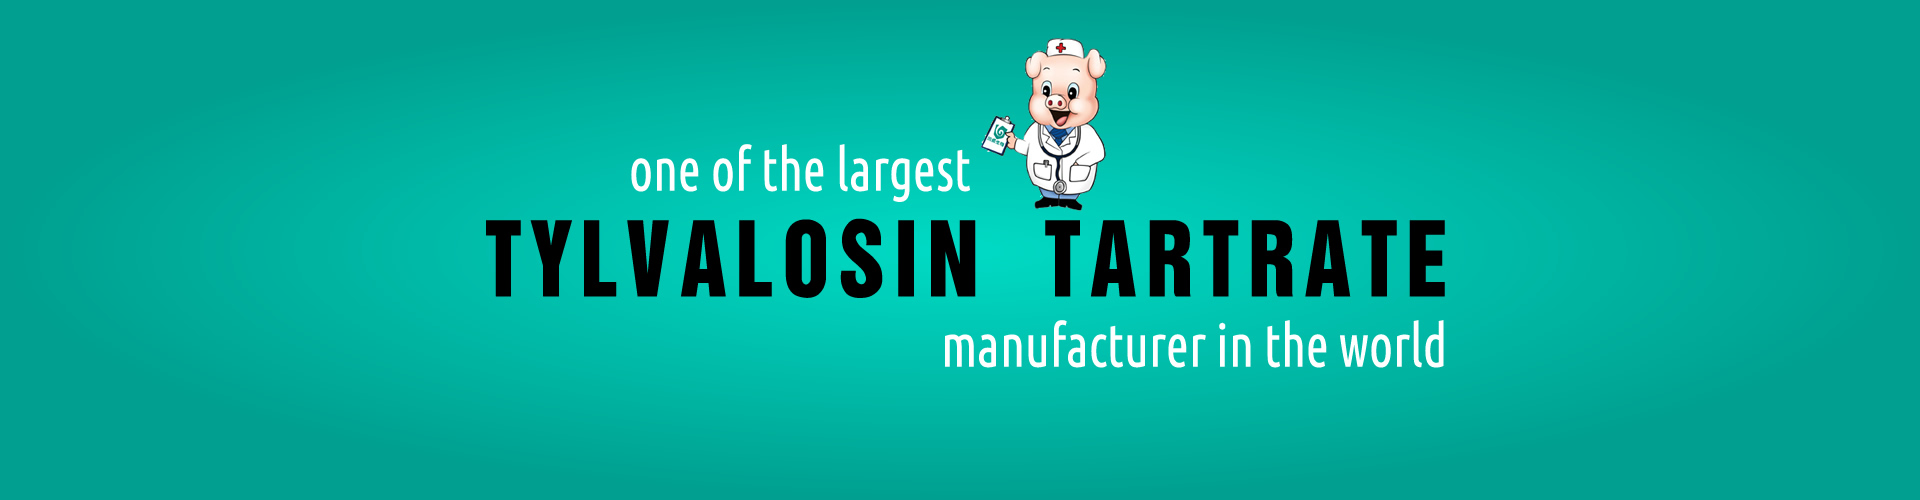 One of the largest tylvalosin tartrate manufacturer in the world